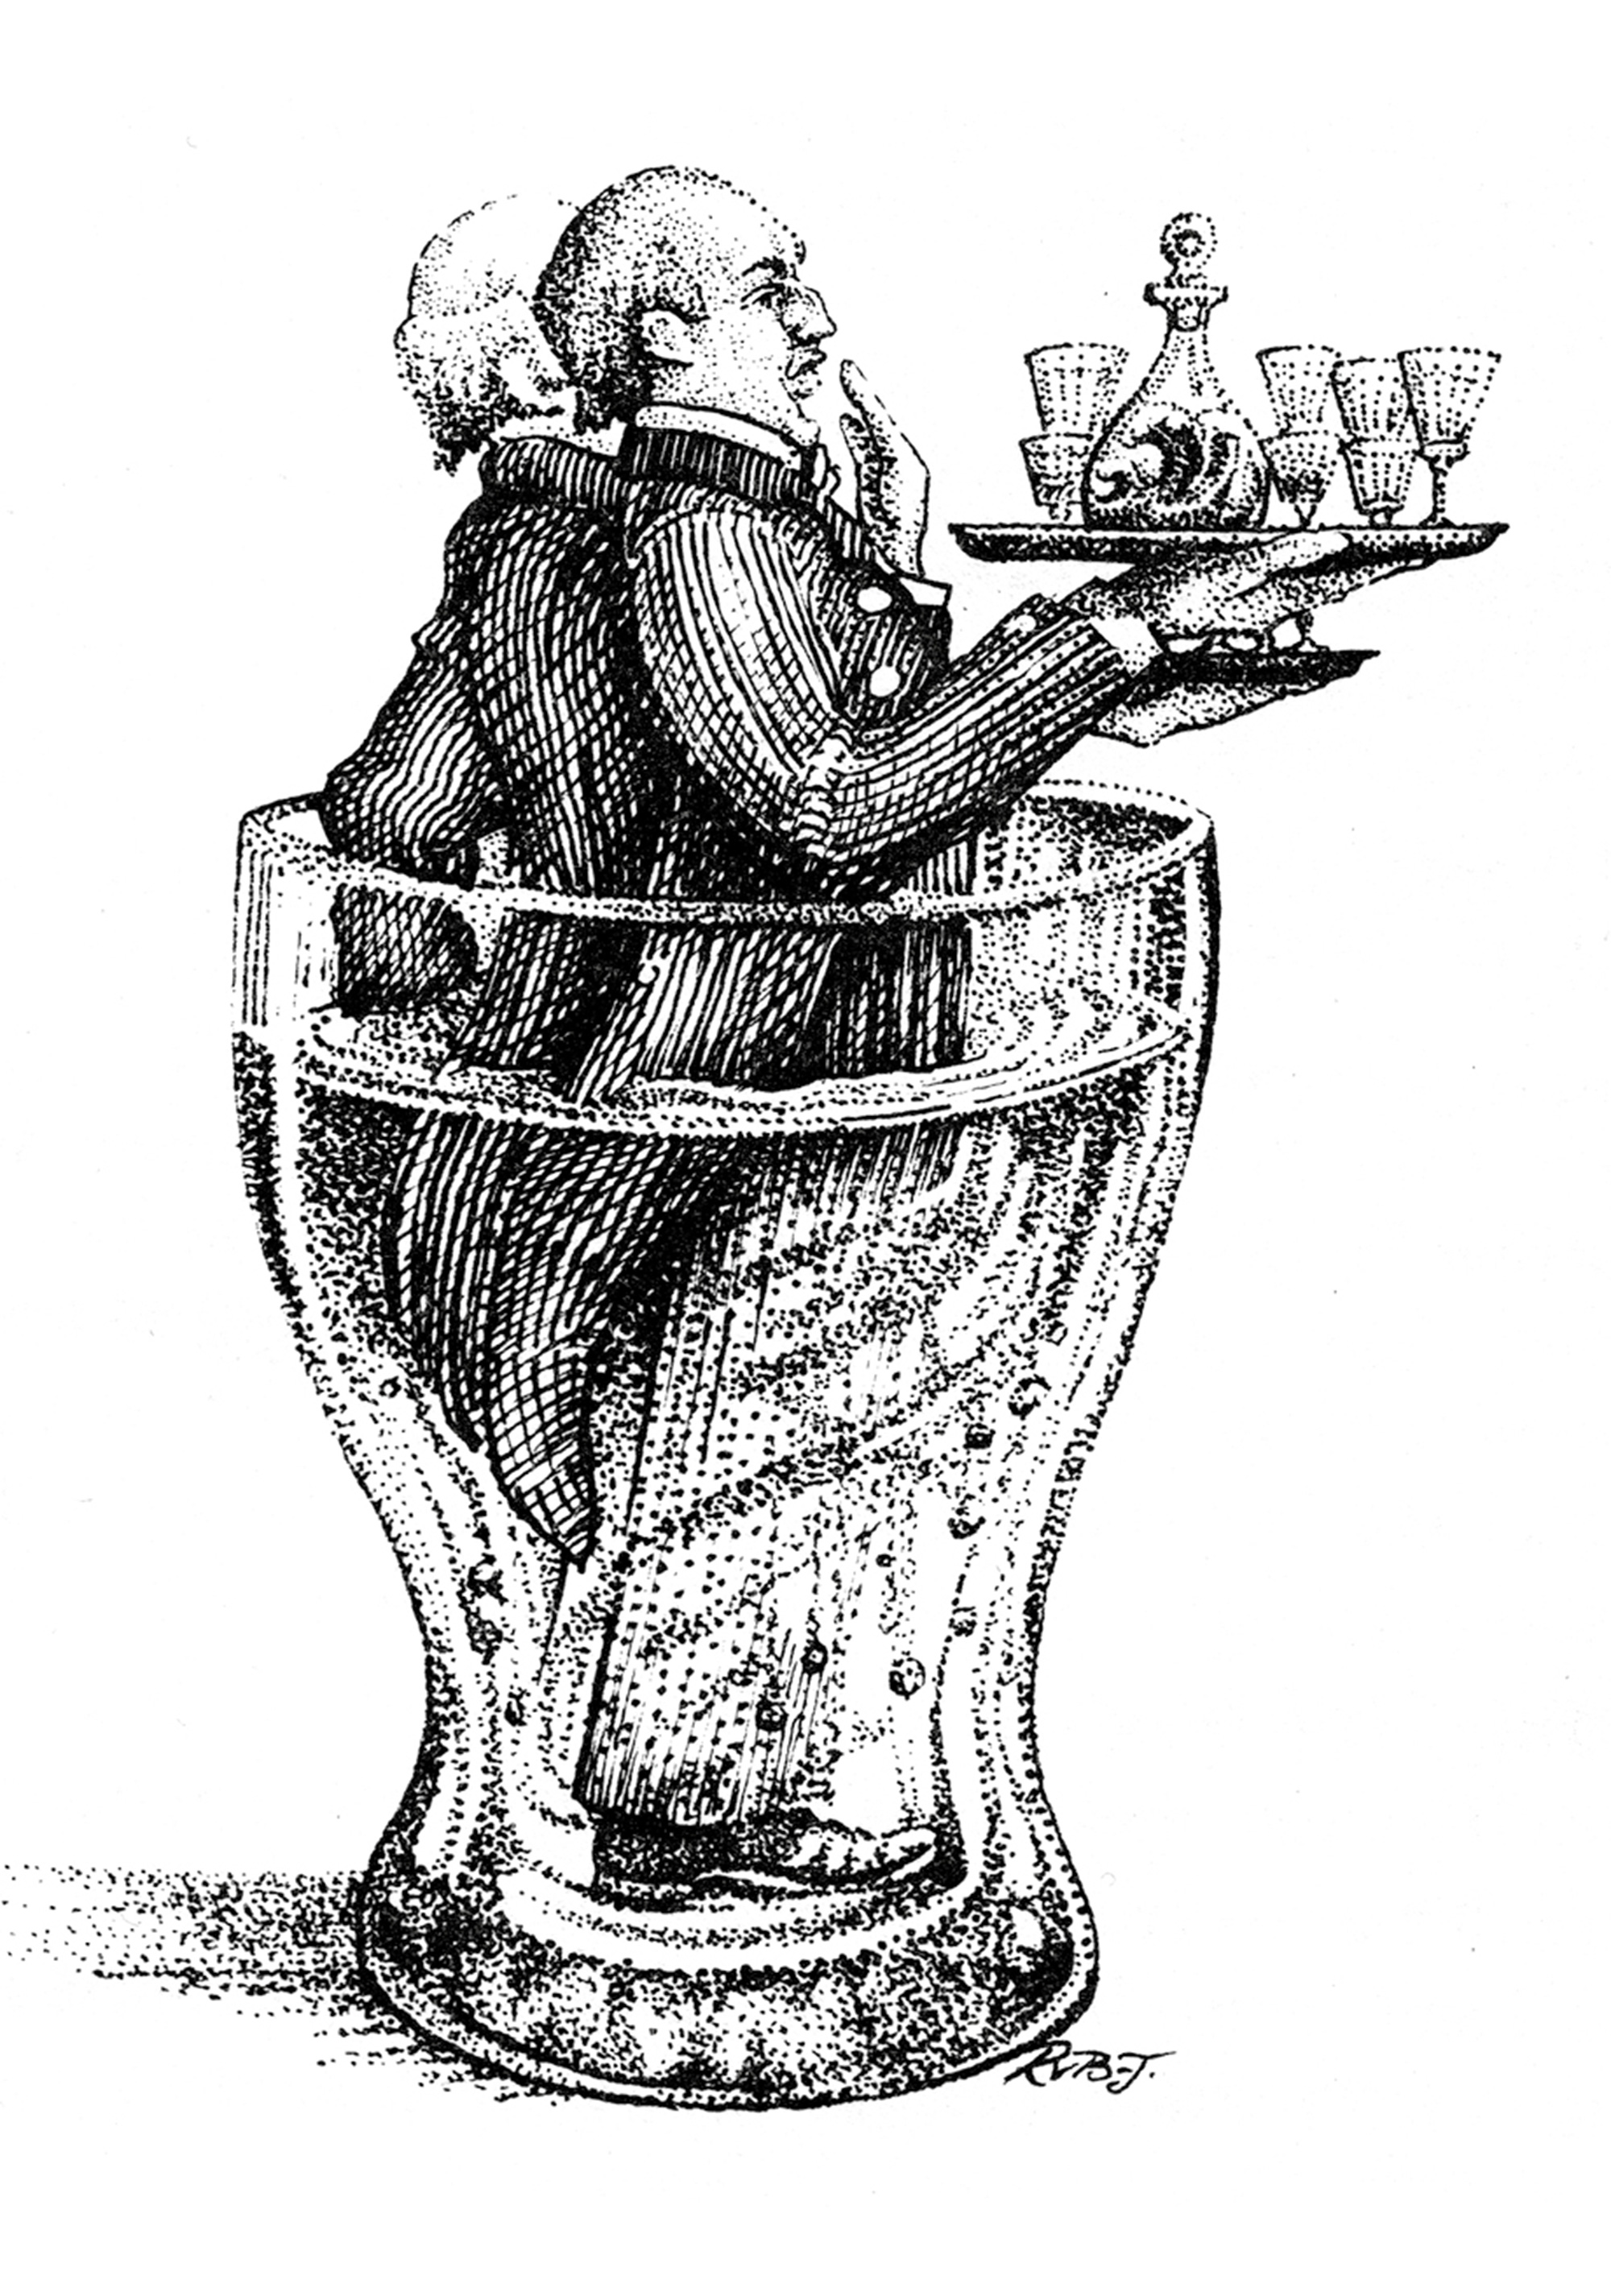 A modified version of a stippled drawing by J. J. Grandville of a “draught” of butlers, submerged in a drinking glass, carrying trays of spirit decanters and cordial glasses.